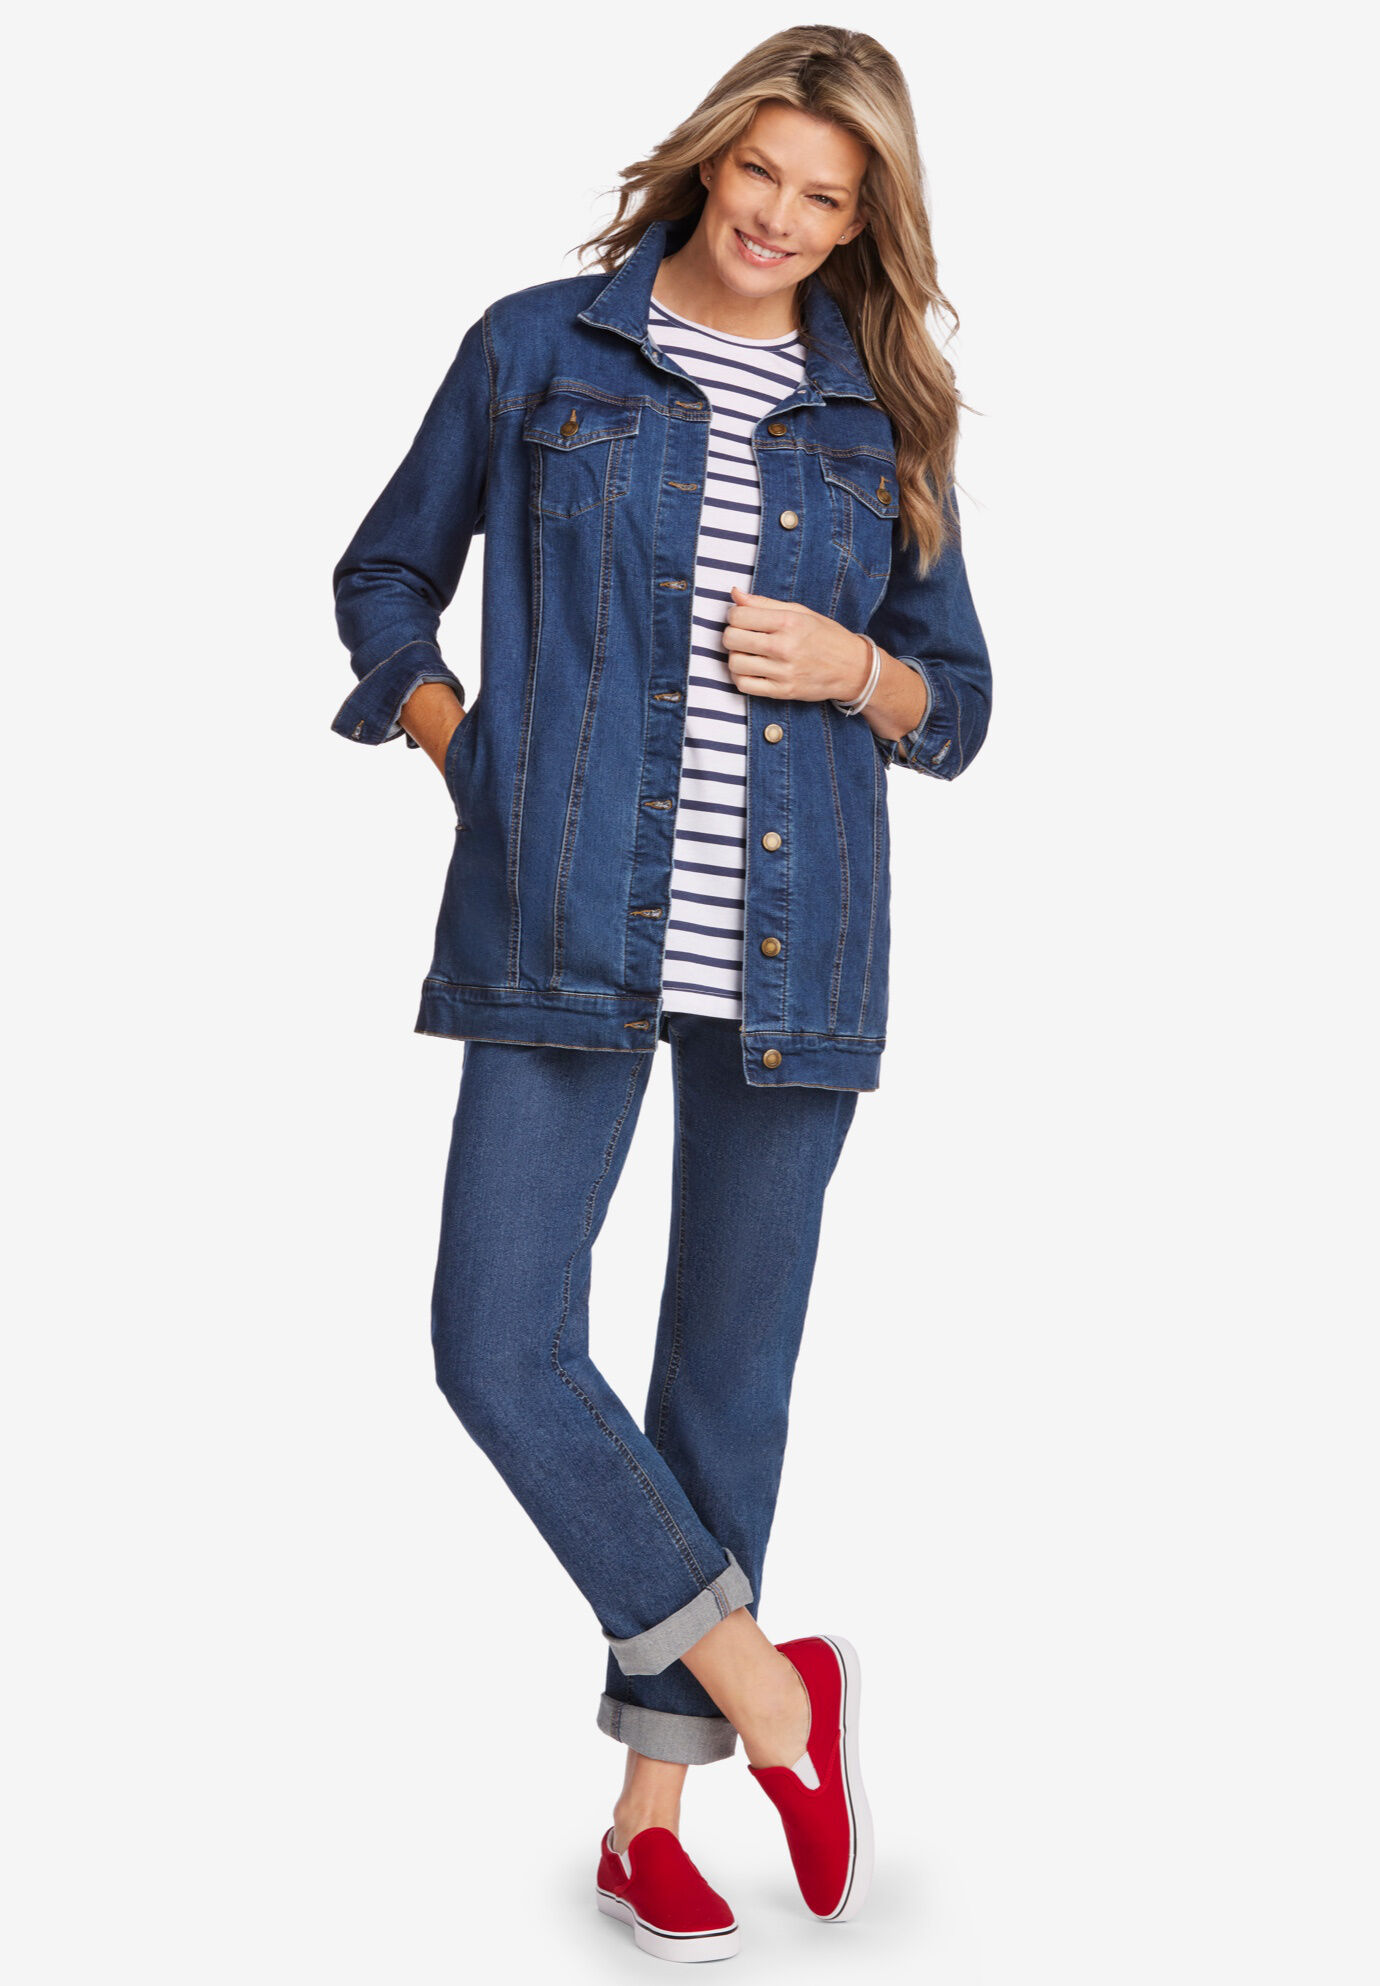 Long Trench Womens Spring Denim Jacket Jeans Single breasted coat shirt  Clothes | eBay